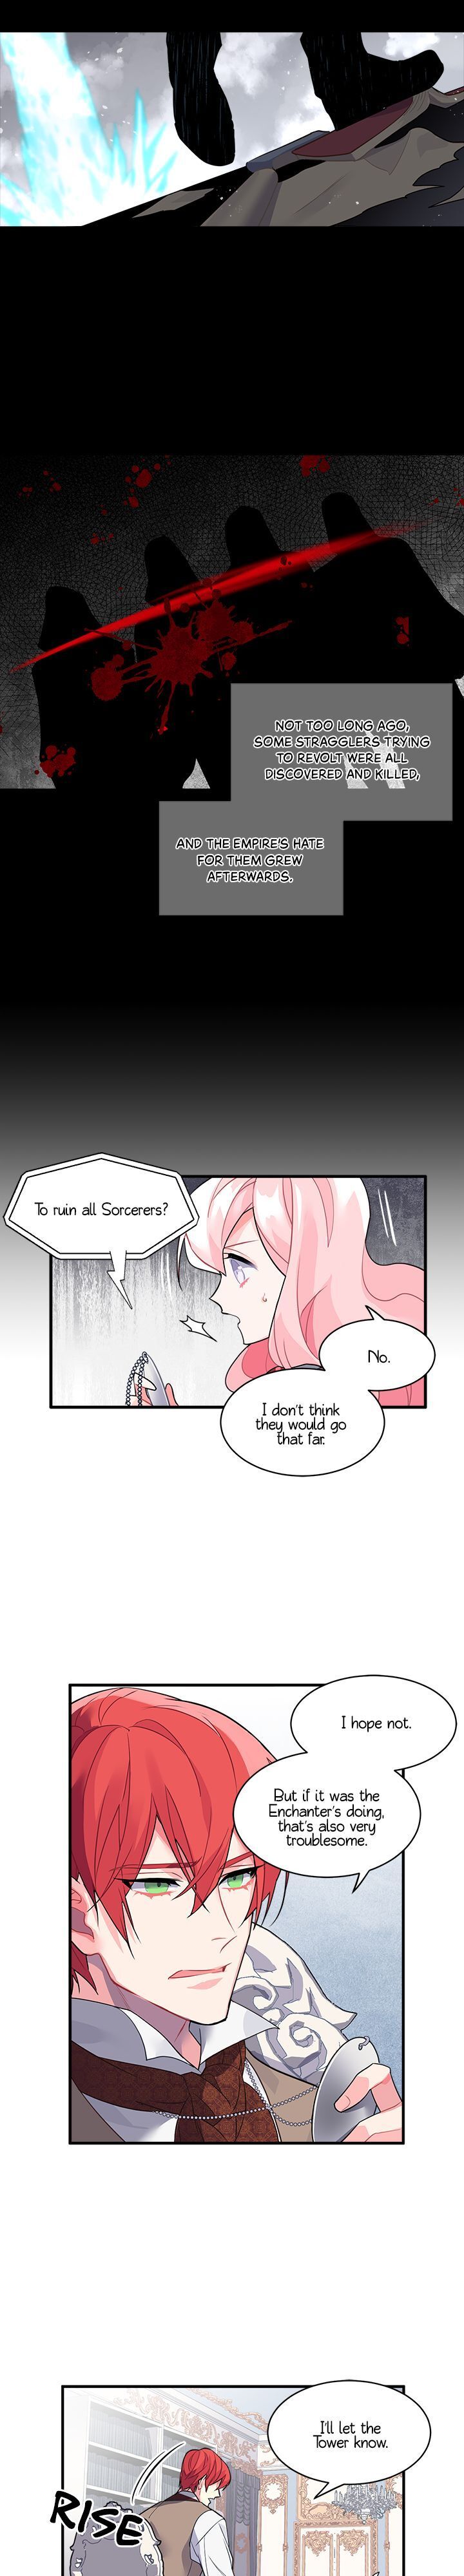 Sica Wolf Chapter 016 page 2